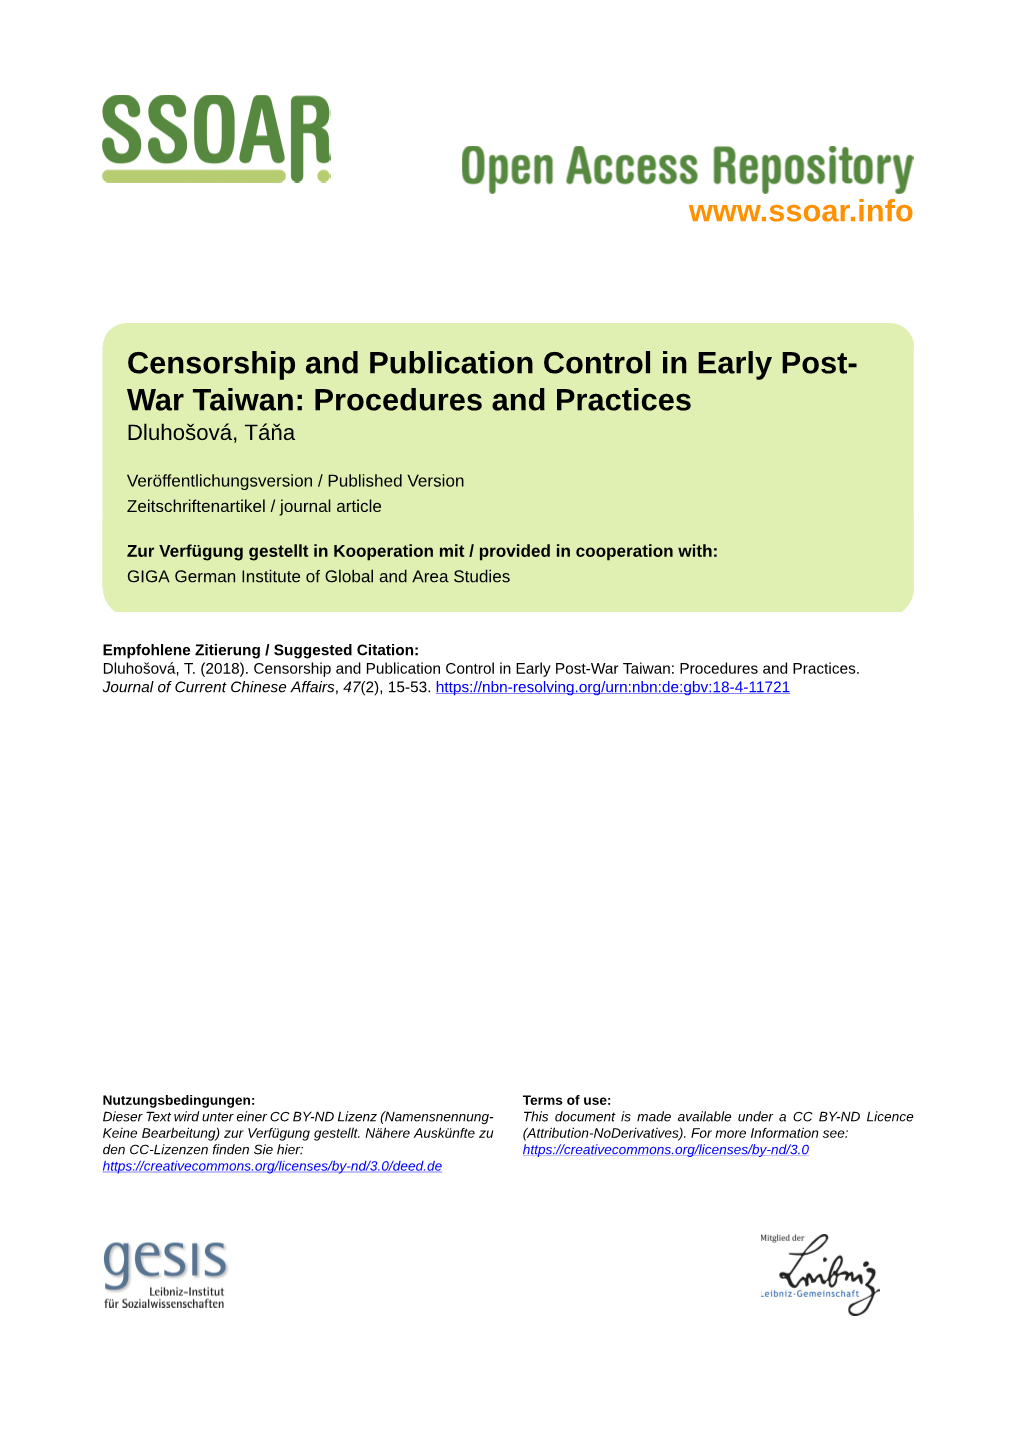 Censorship and Publication Control in Early Post-War Taiwan: Procedures and Practices